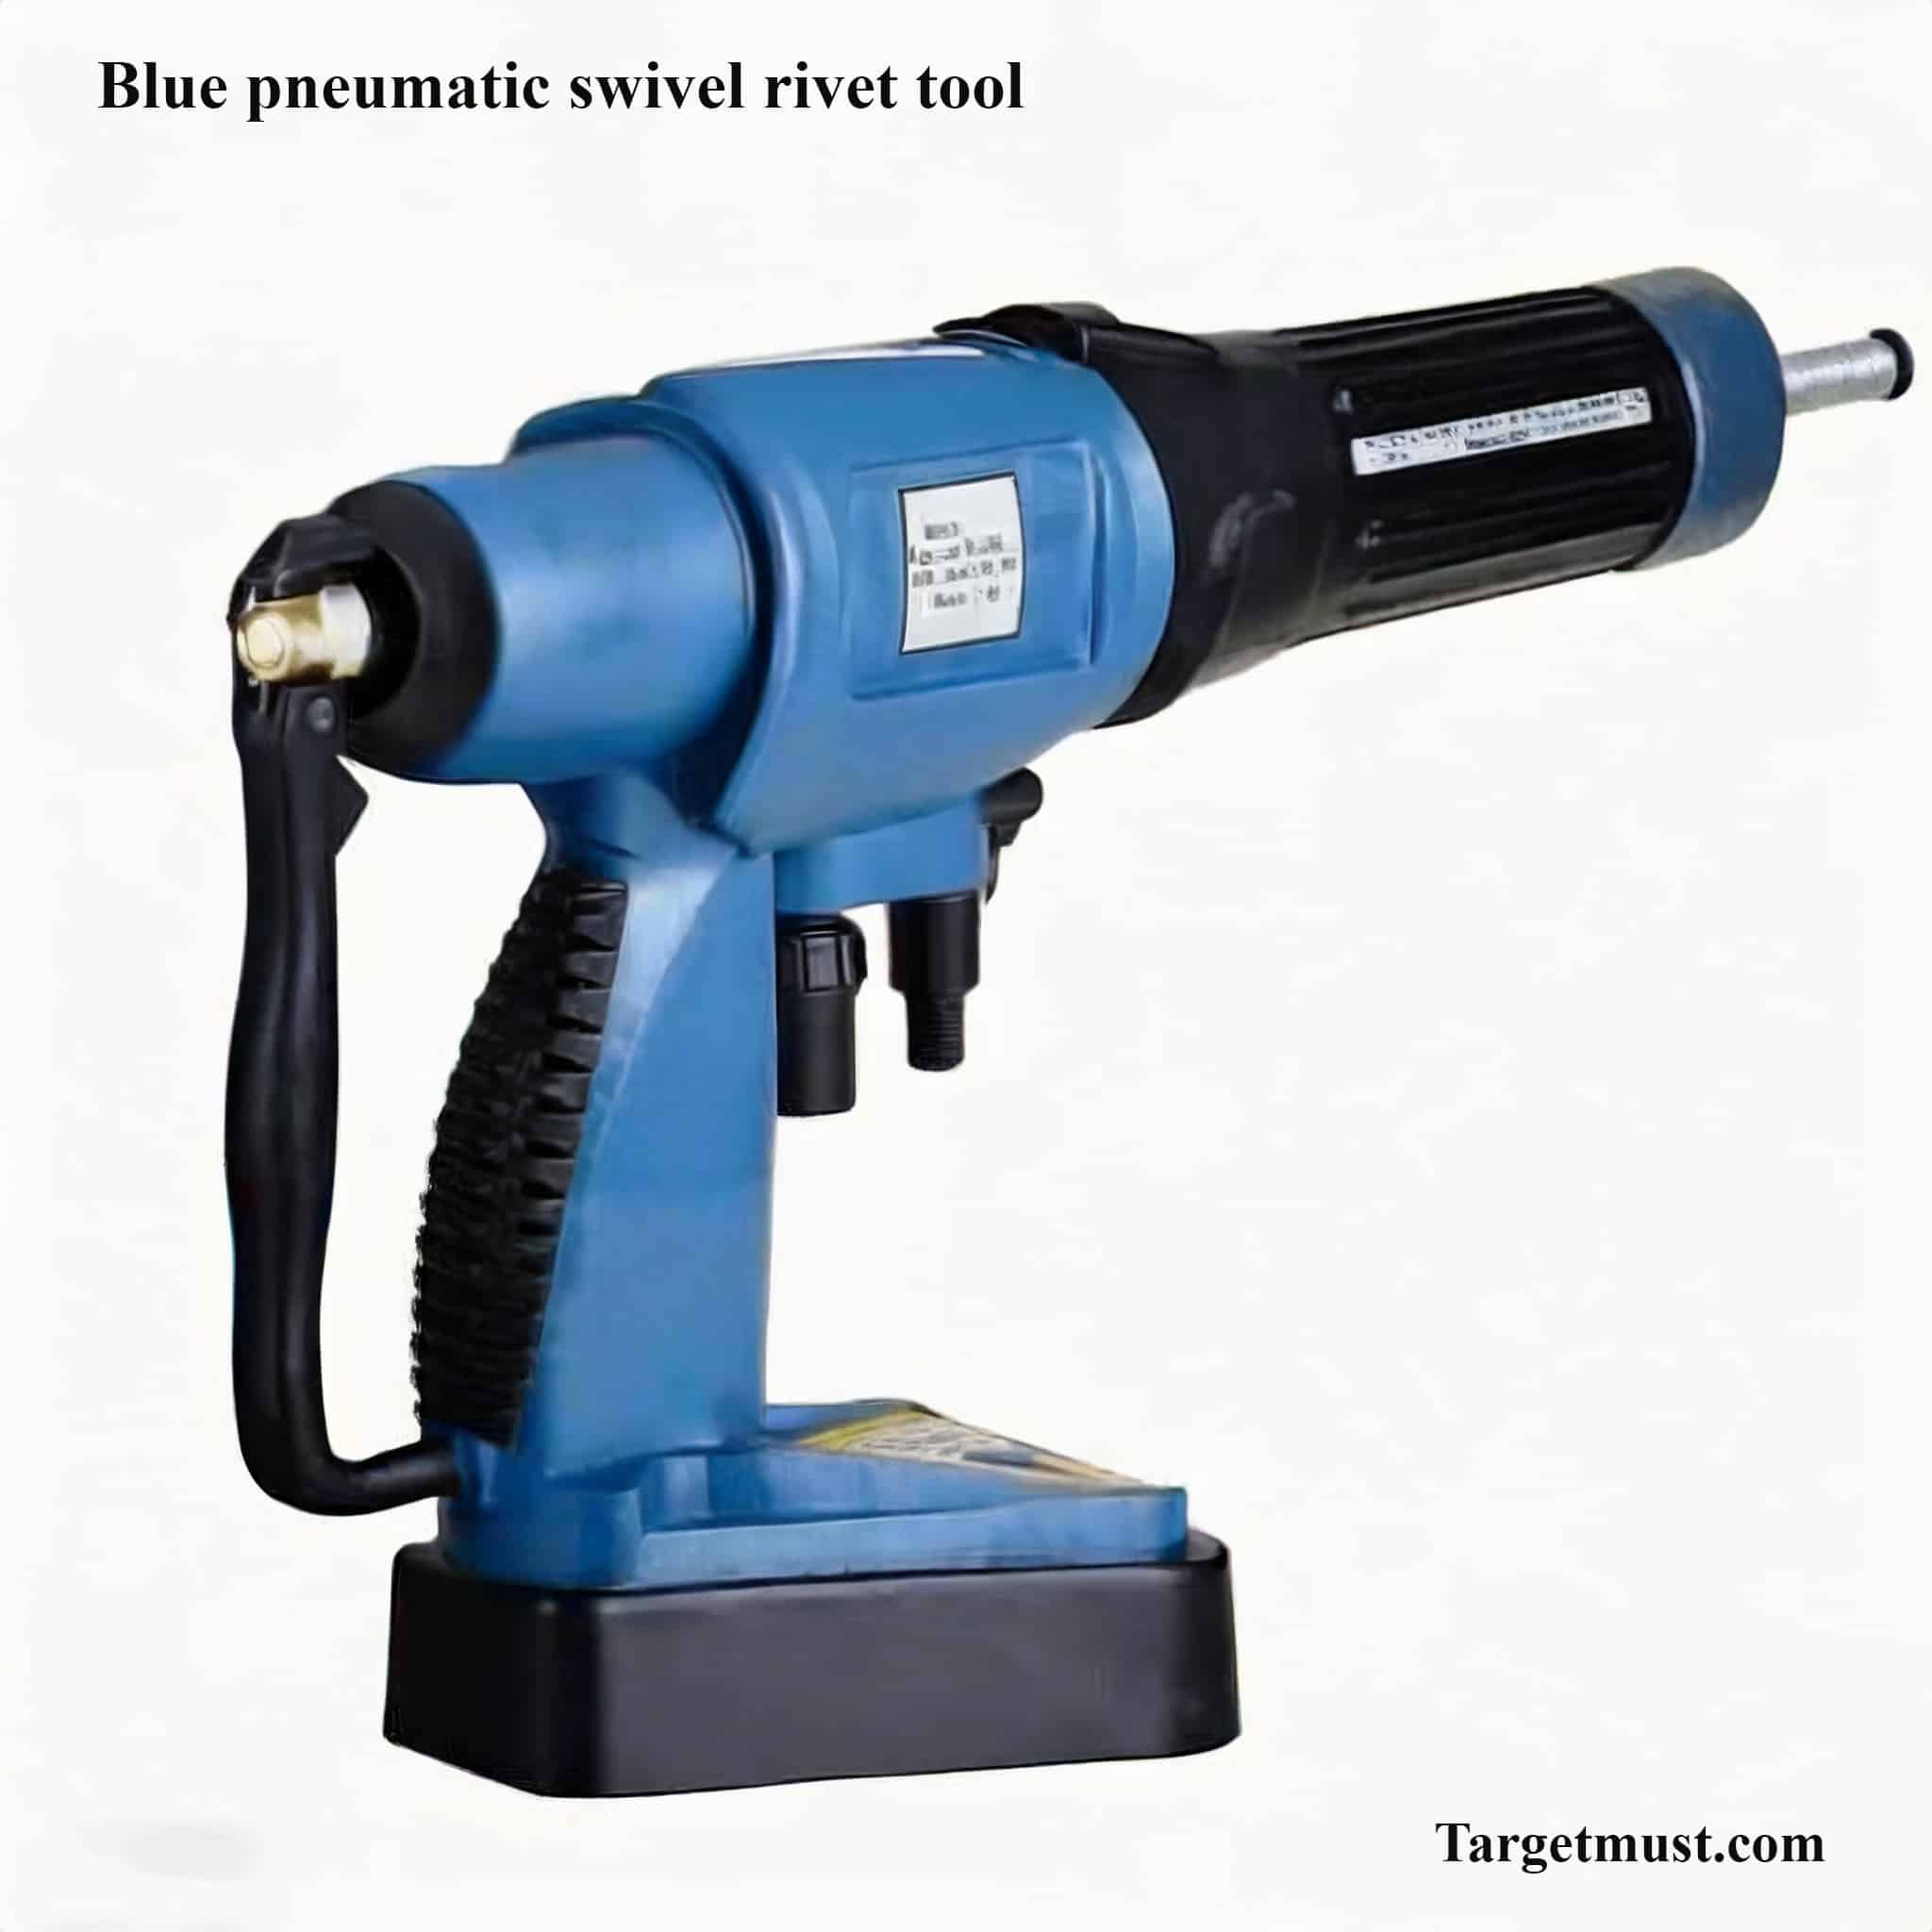 You are currently viewing Essential Features to Look for in a Blue Pneumatic Swivel Rivet Tool